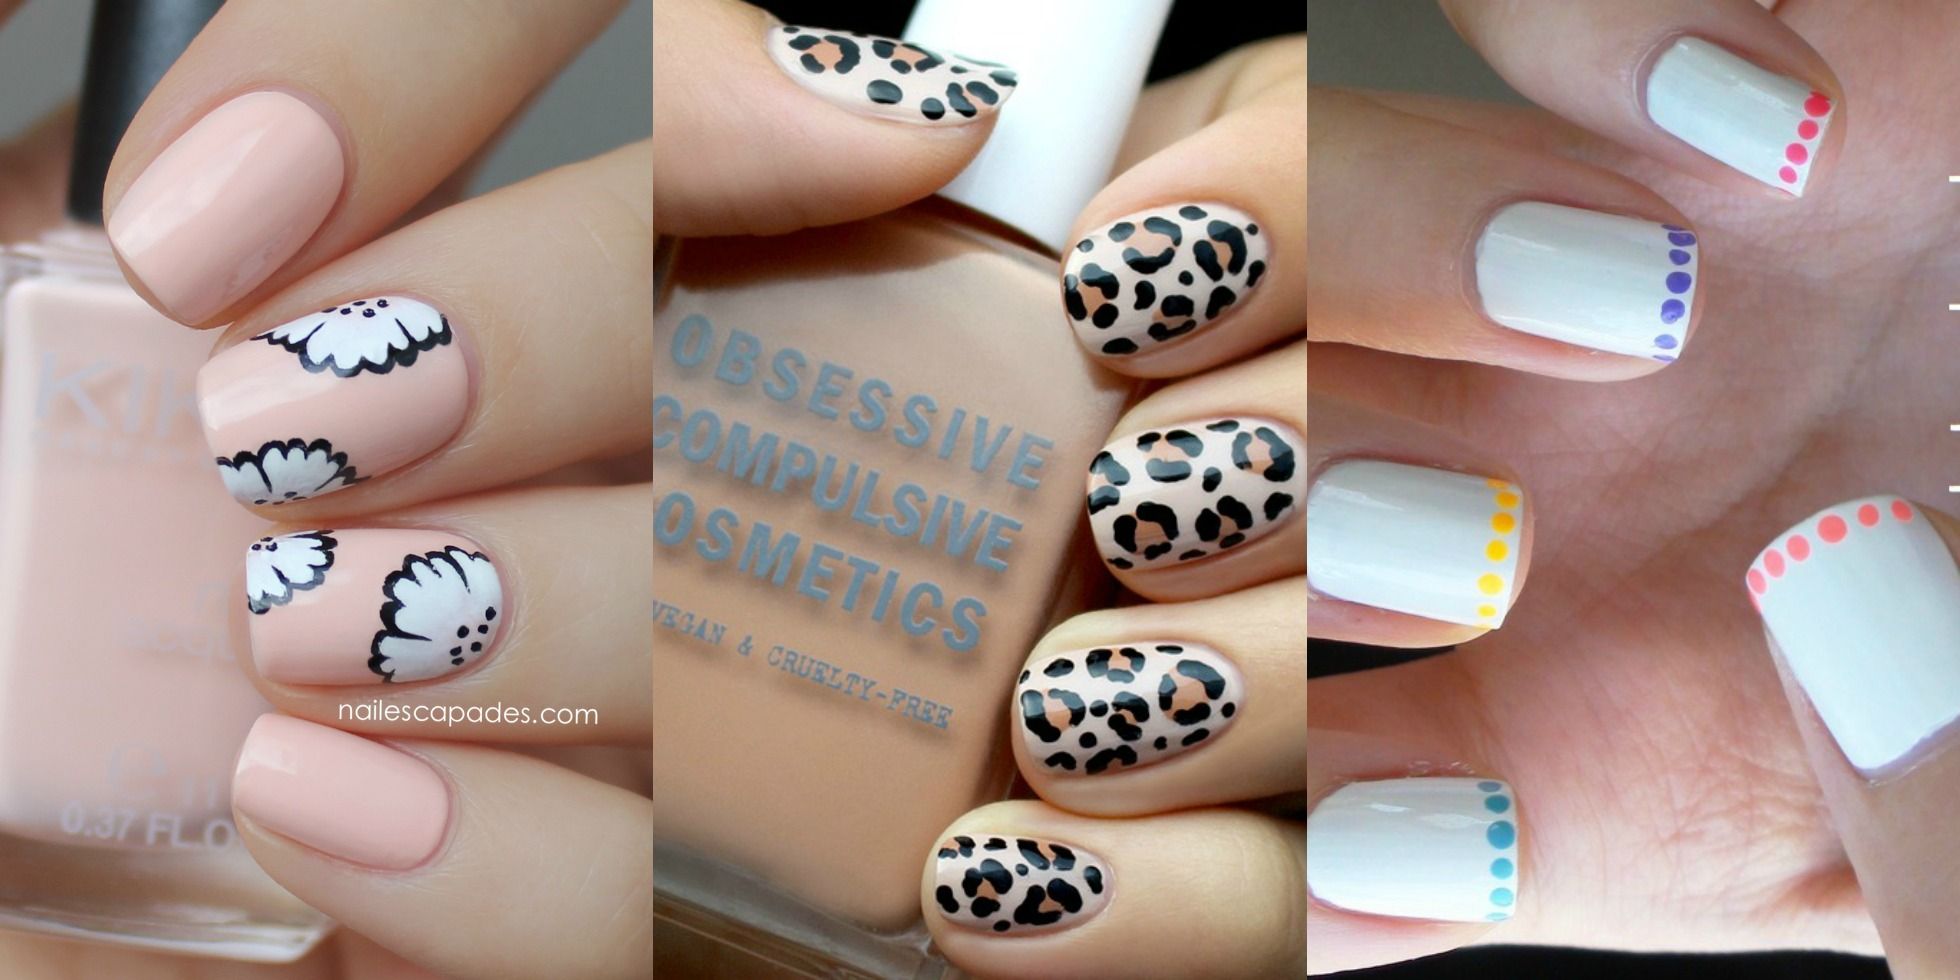 1. Simple Short Nail Art Designs for Beginners - wide 1